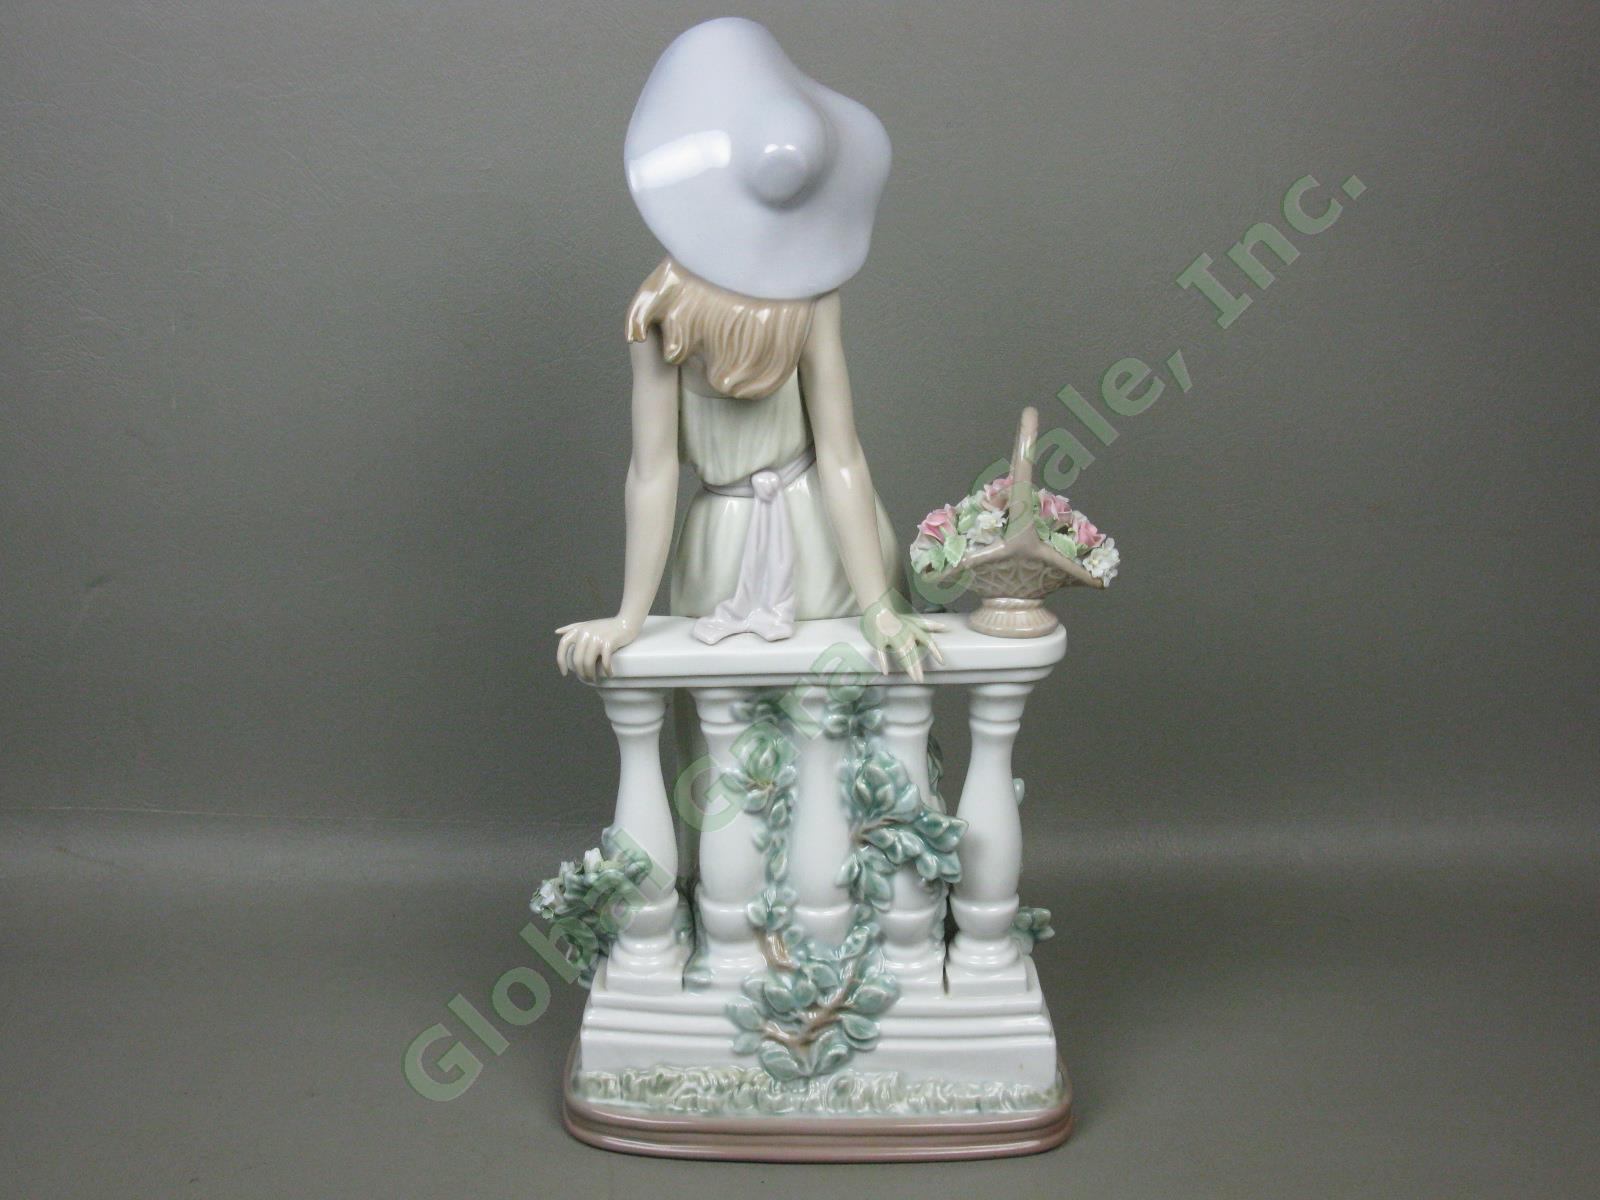 Vtg Lladro #5378 Time For Reflection 13.5" Figurine 1986-1992 Woman Flowers Hat 3